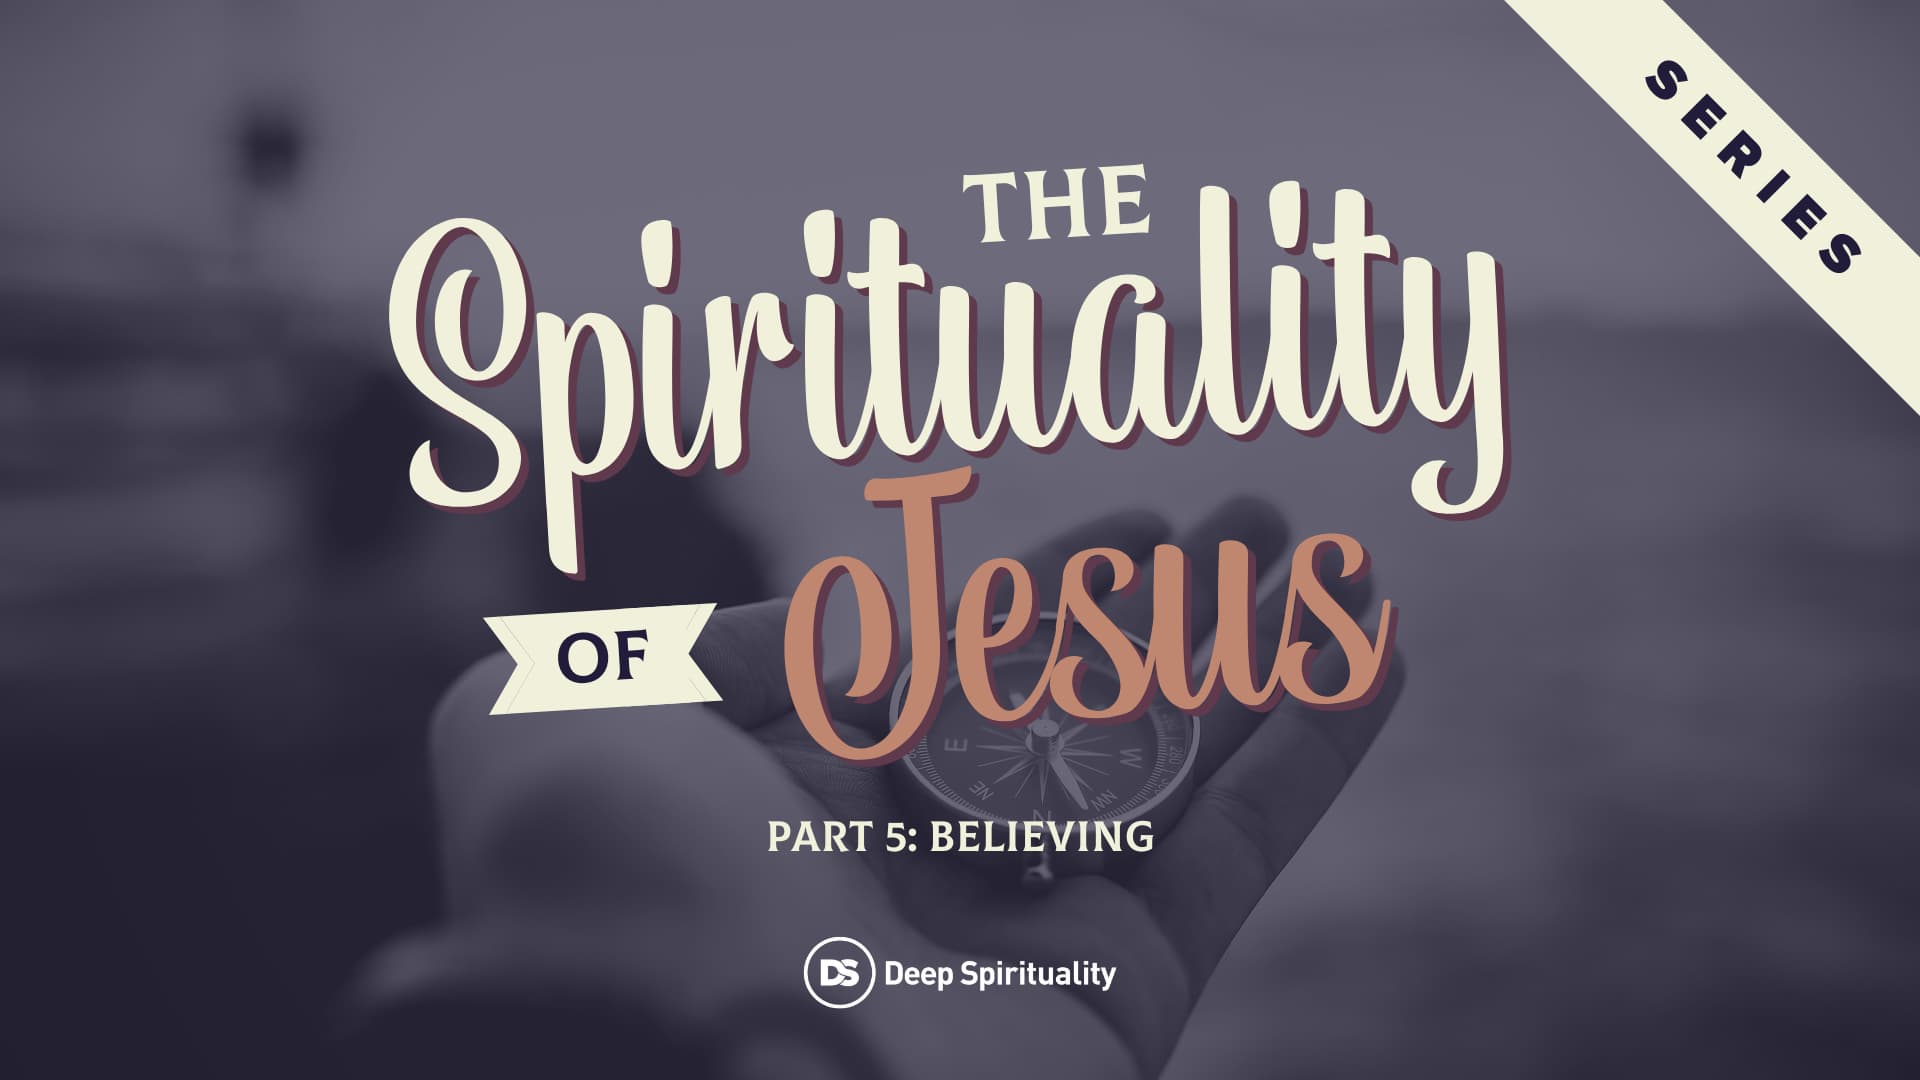 The Spirituality of Jesus, Part 5: Believing 3